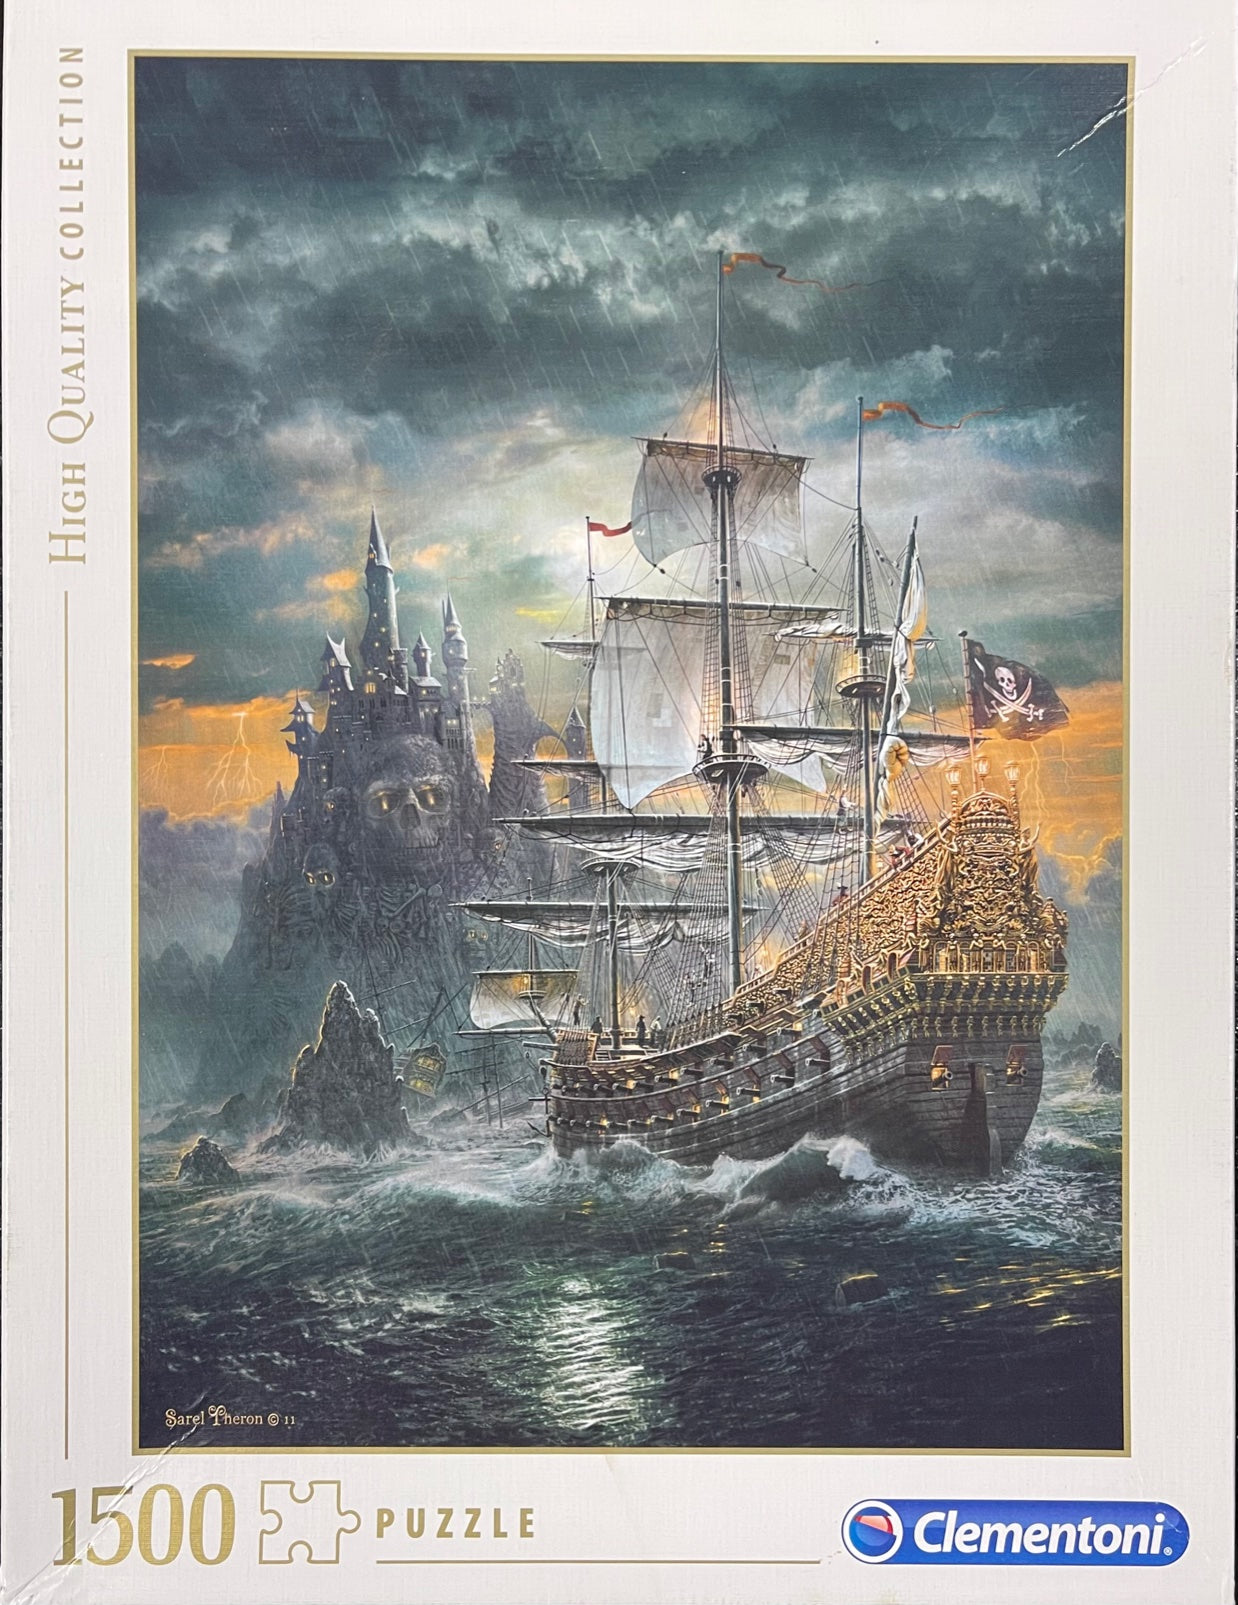 Rental- the Pirate Ship puzzle - Conundrum House